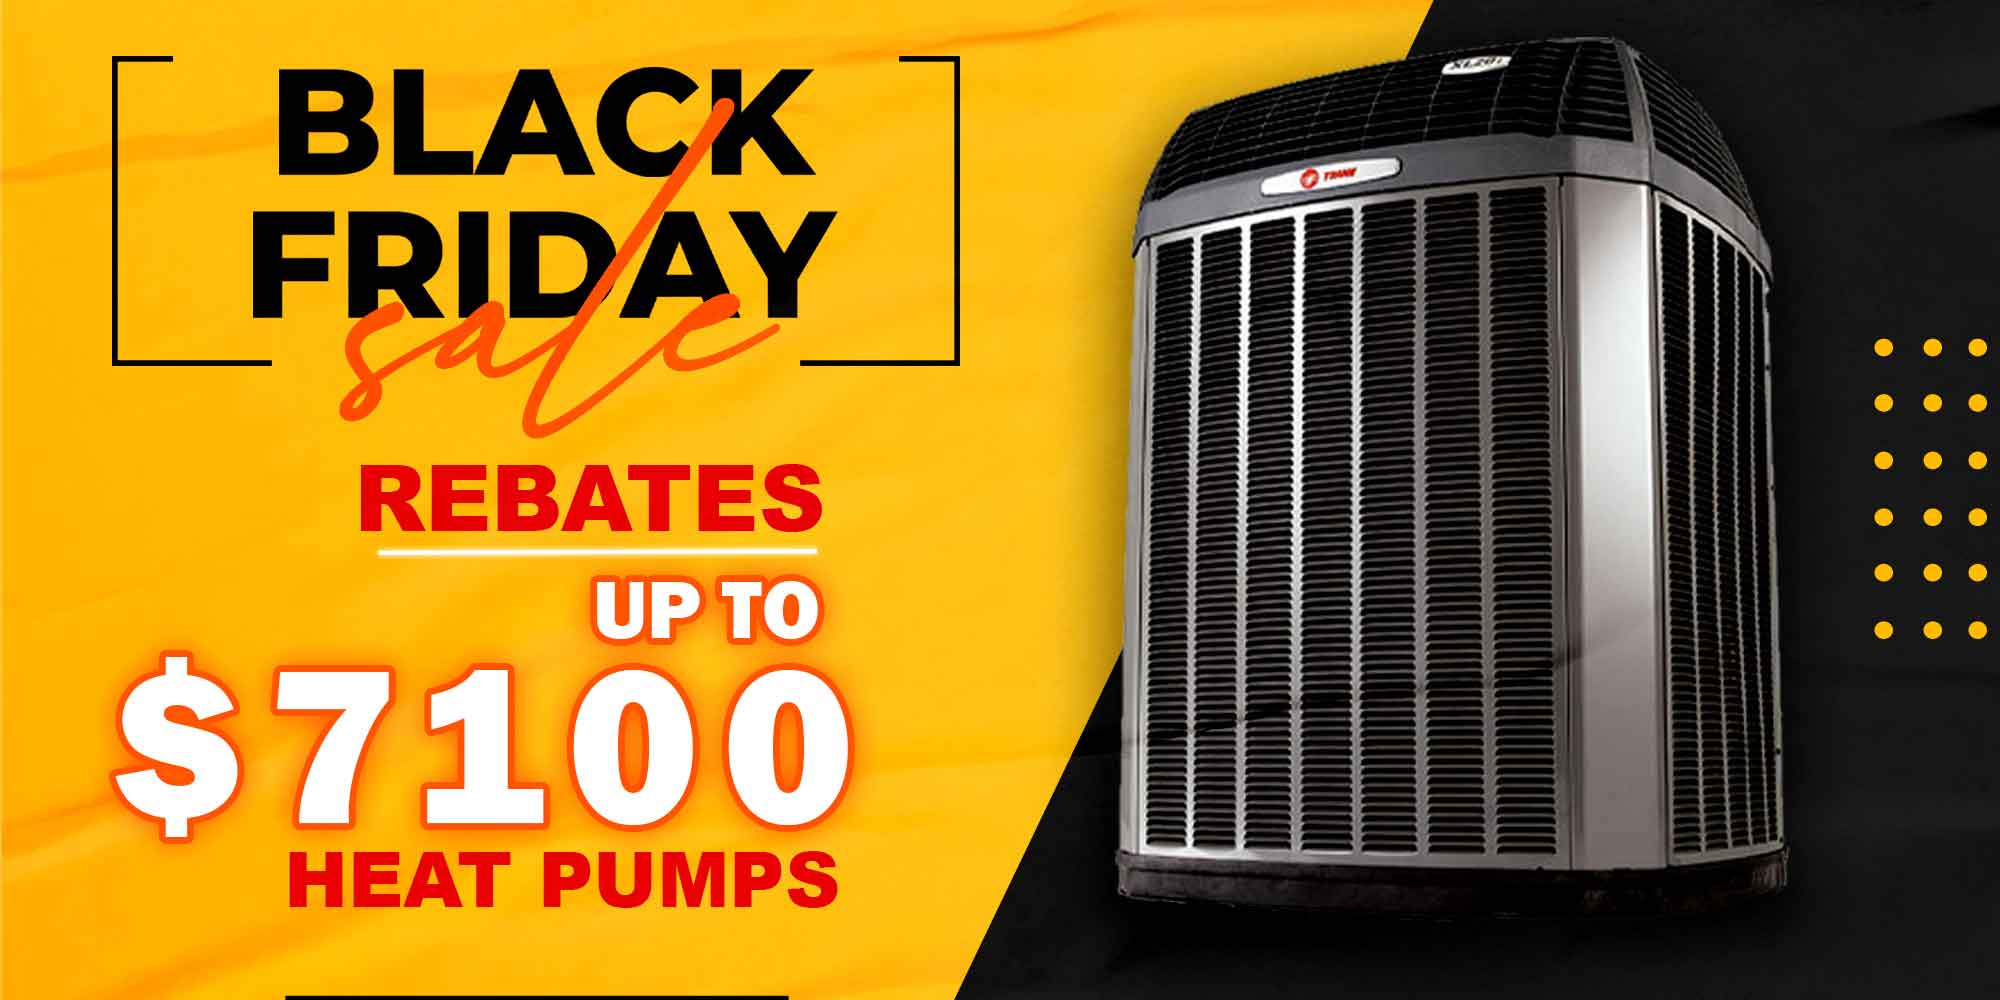 Cambridge Heating and Cooling - Black Friday Offer